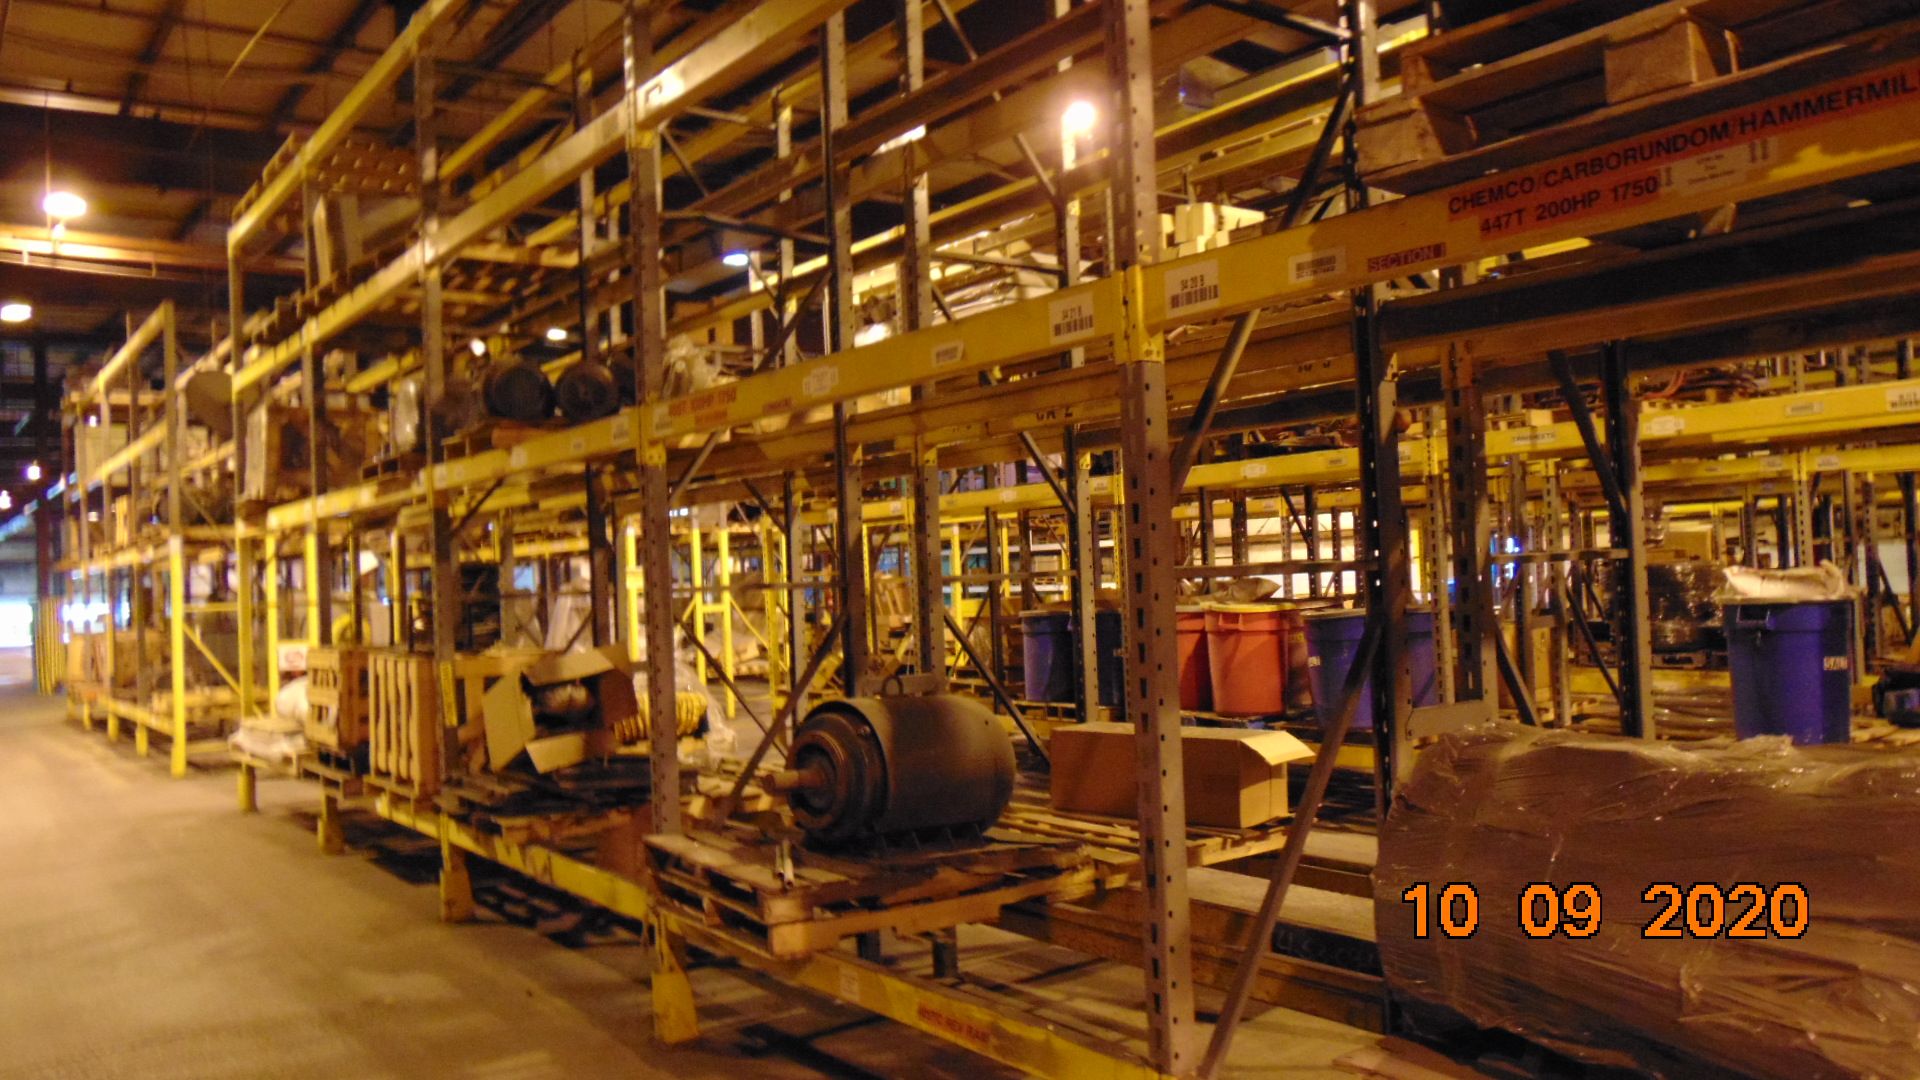 Contents of Warehouse / Industrial Building - Image 3 of 26